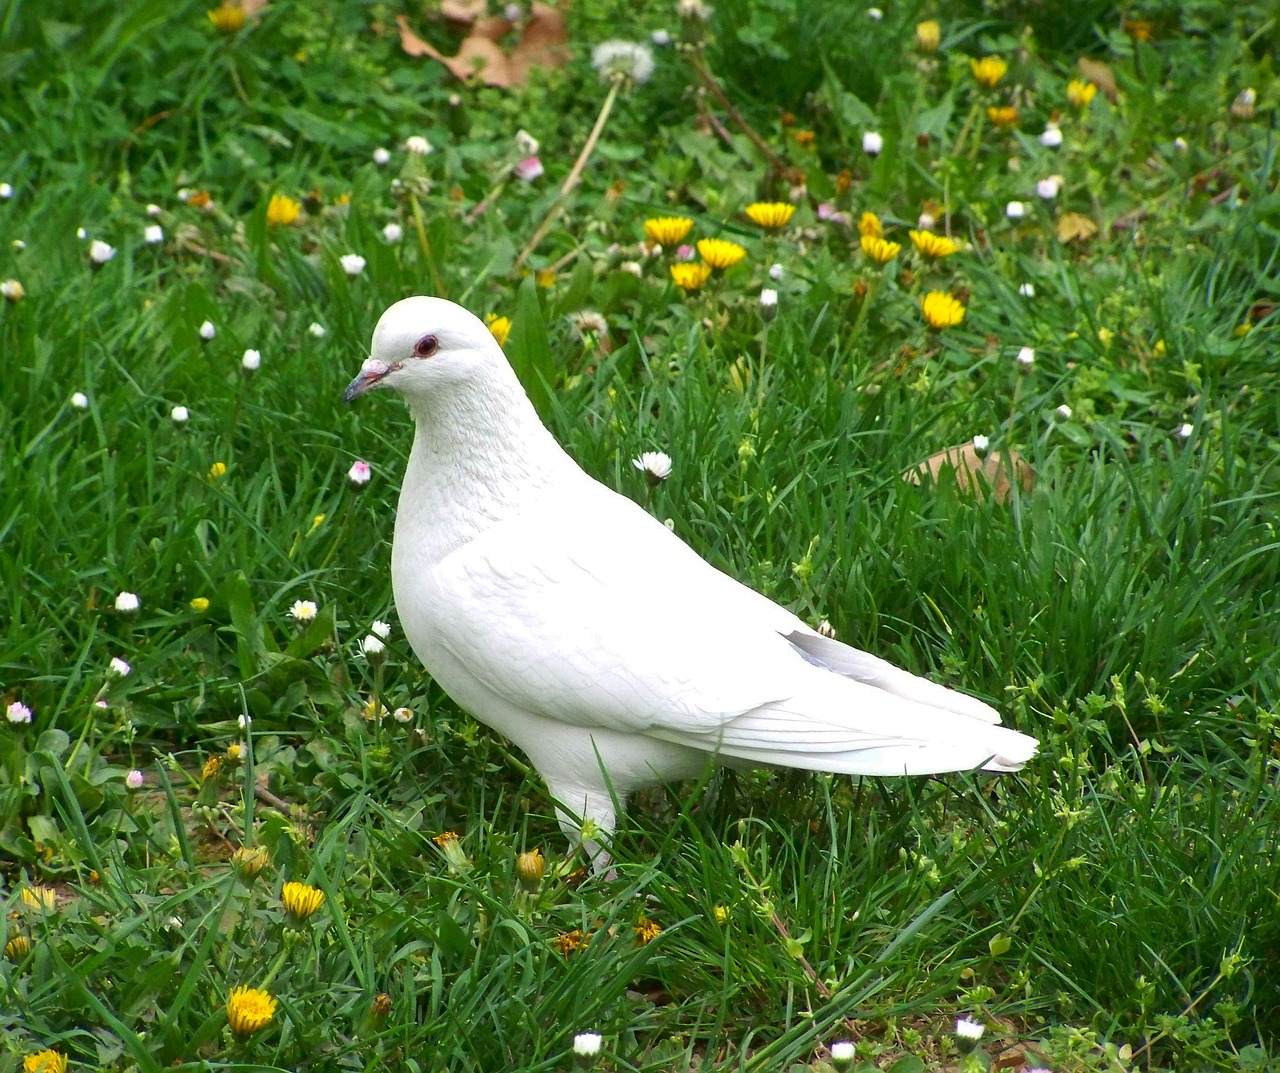 The Meaning of a White Pigeon Symbolism and Significance